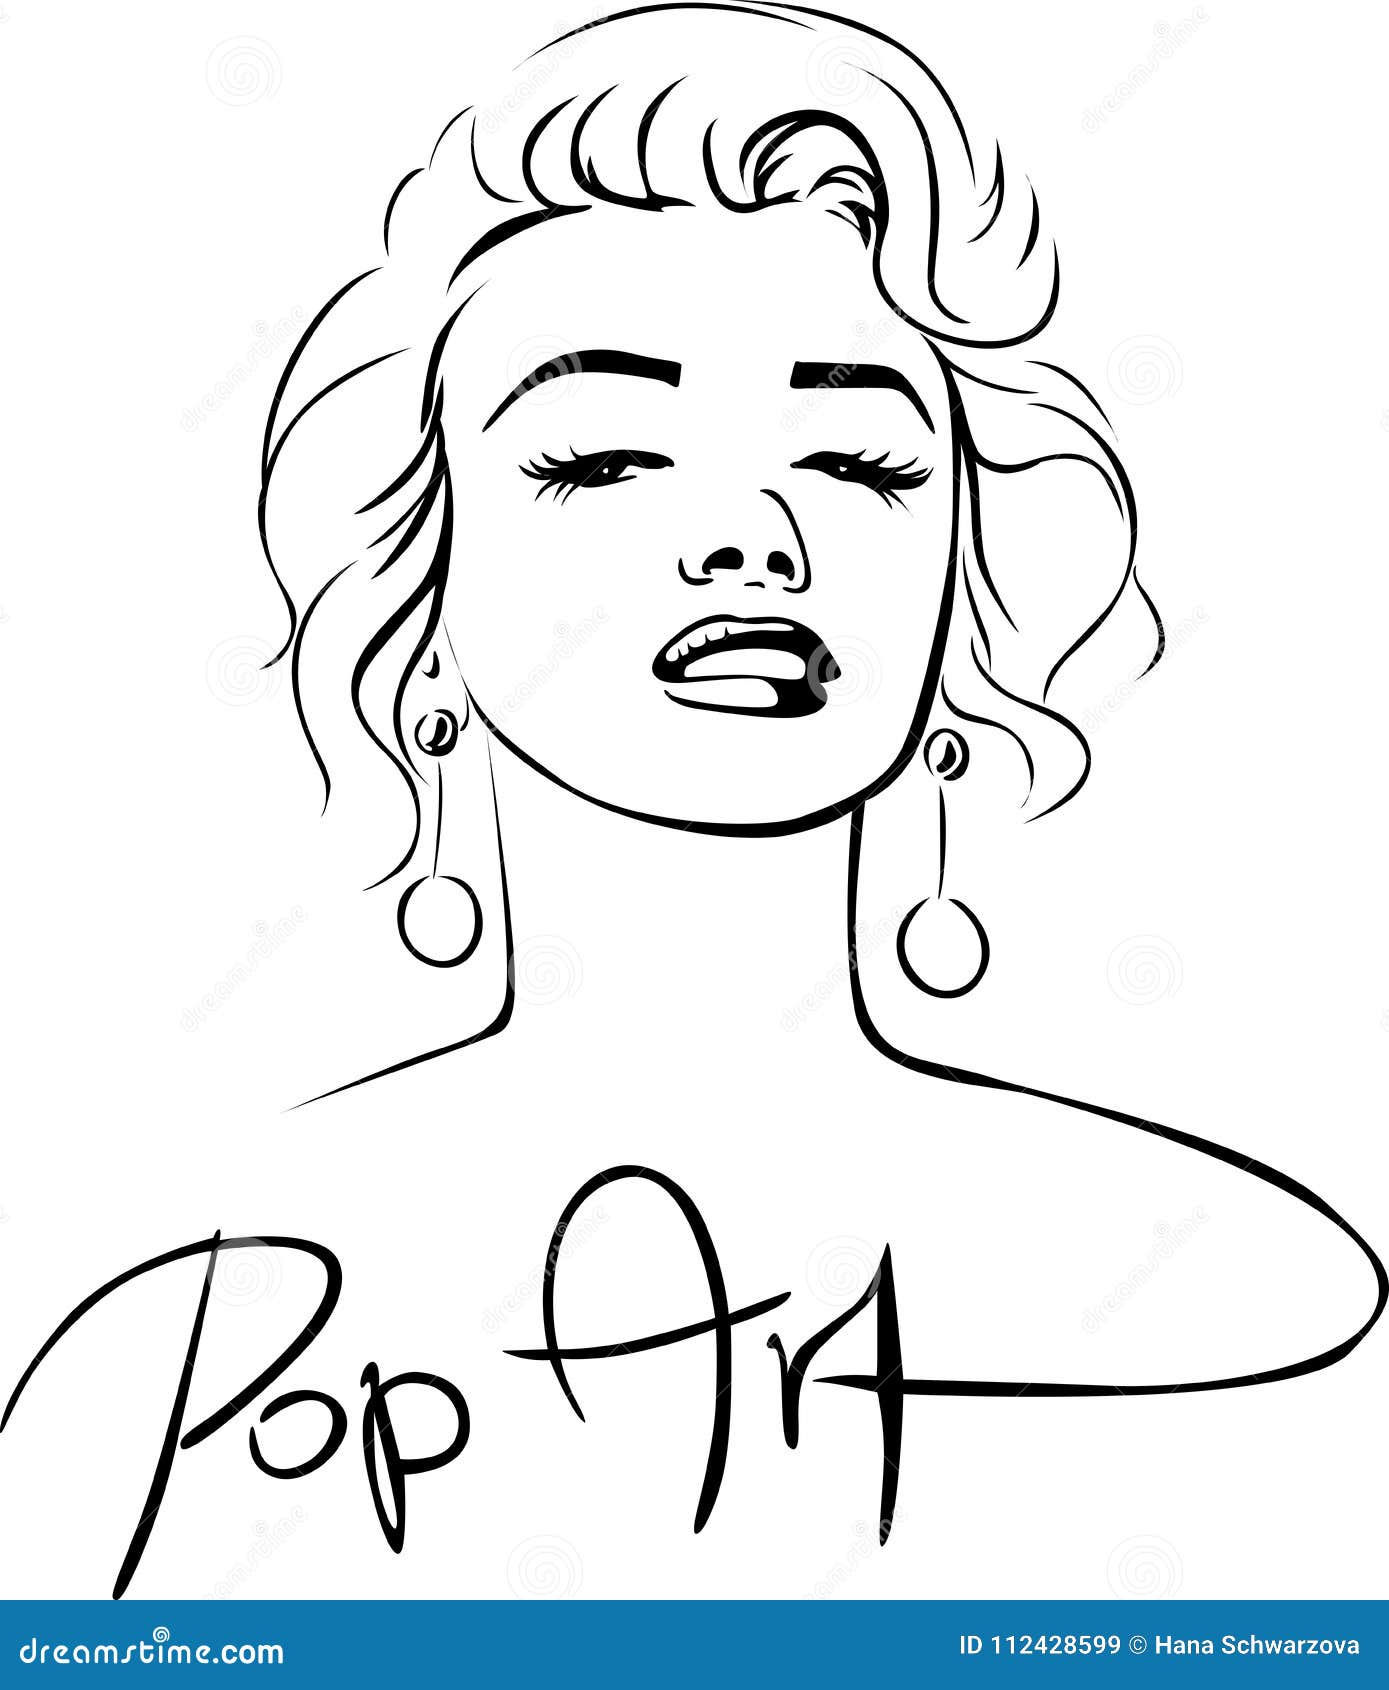 Pop Art Drawing  How To Draw Pop Art Step By Step